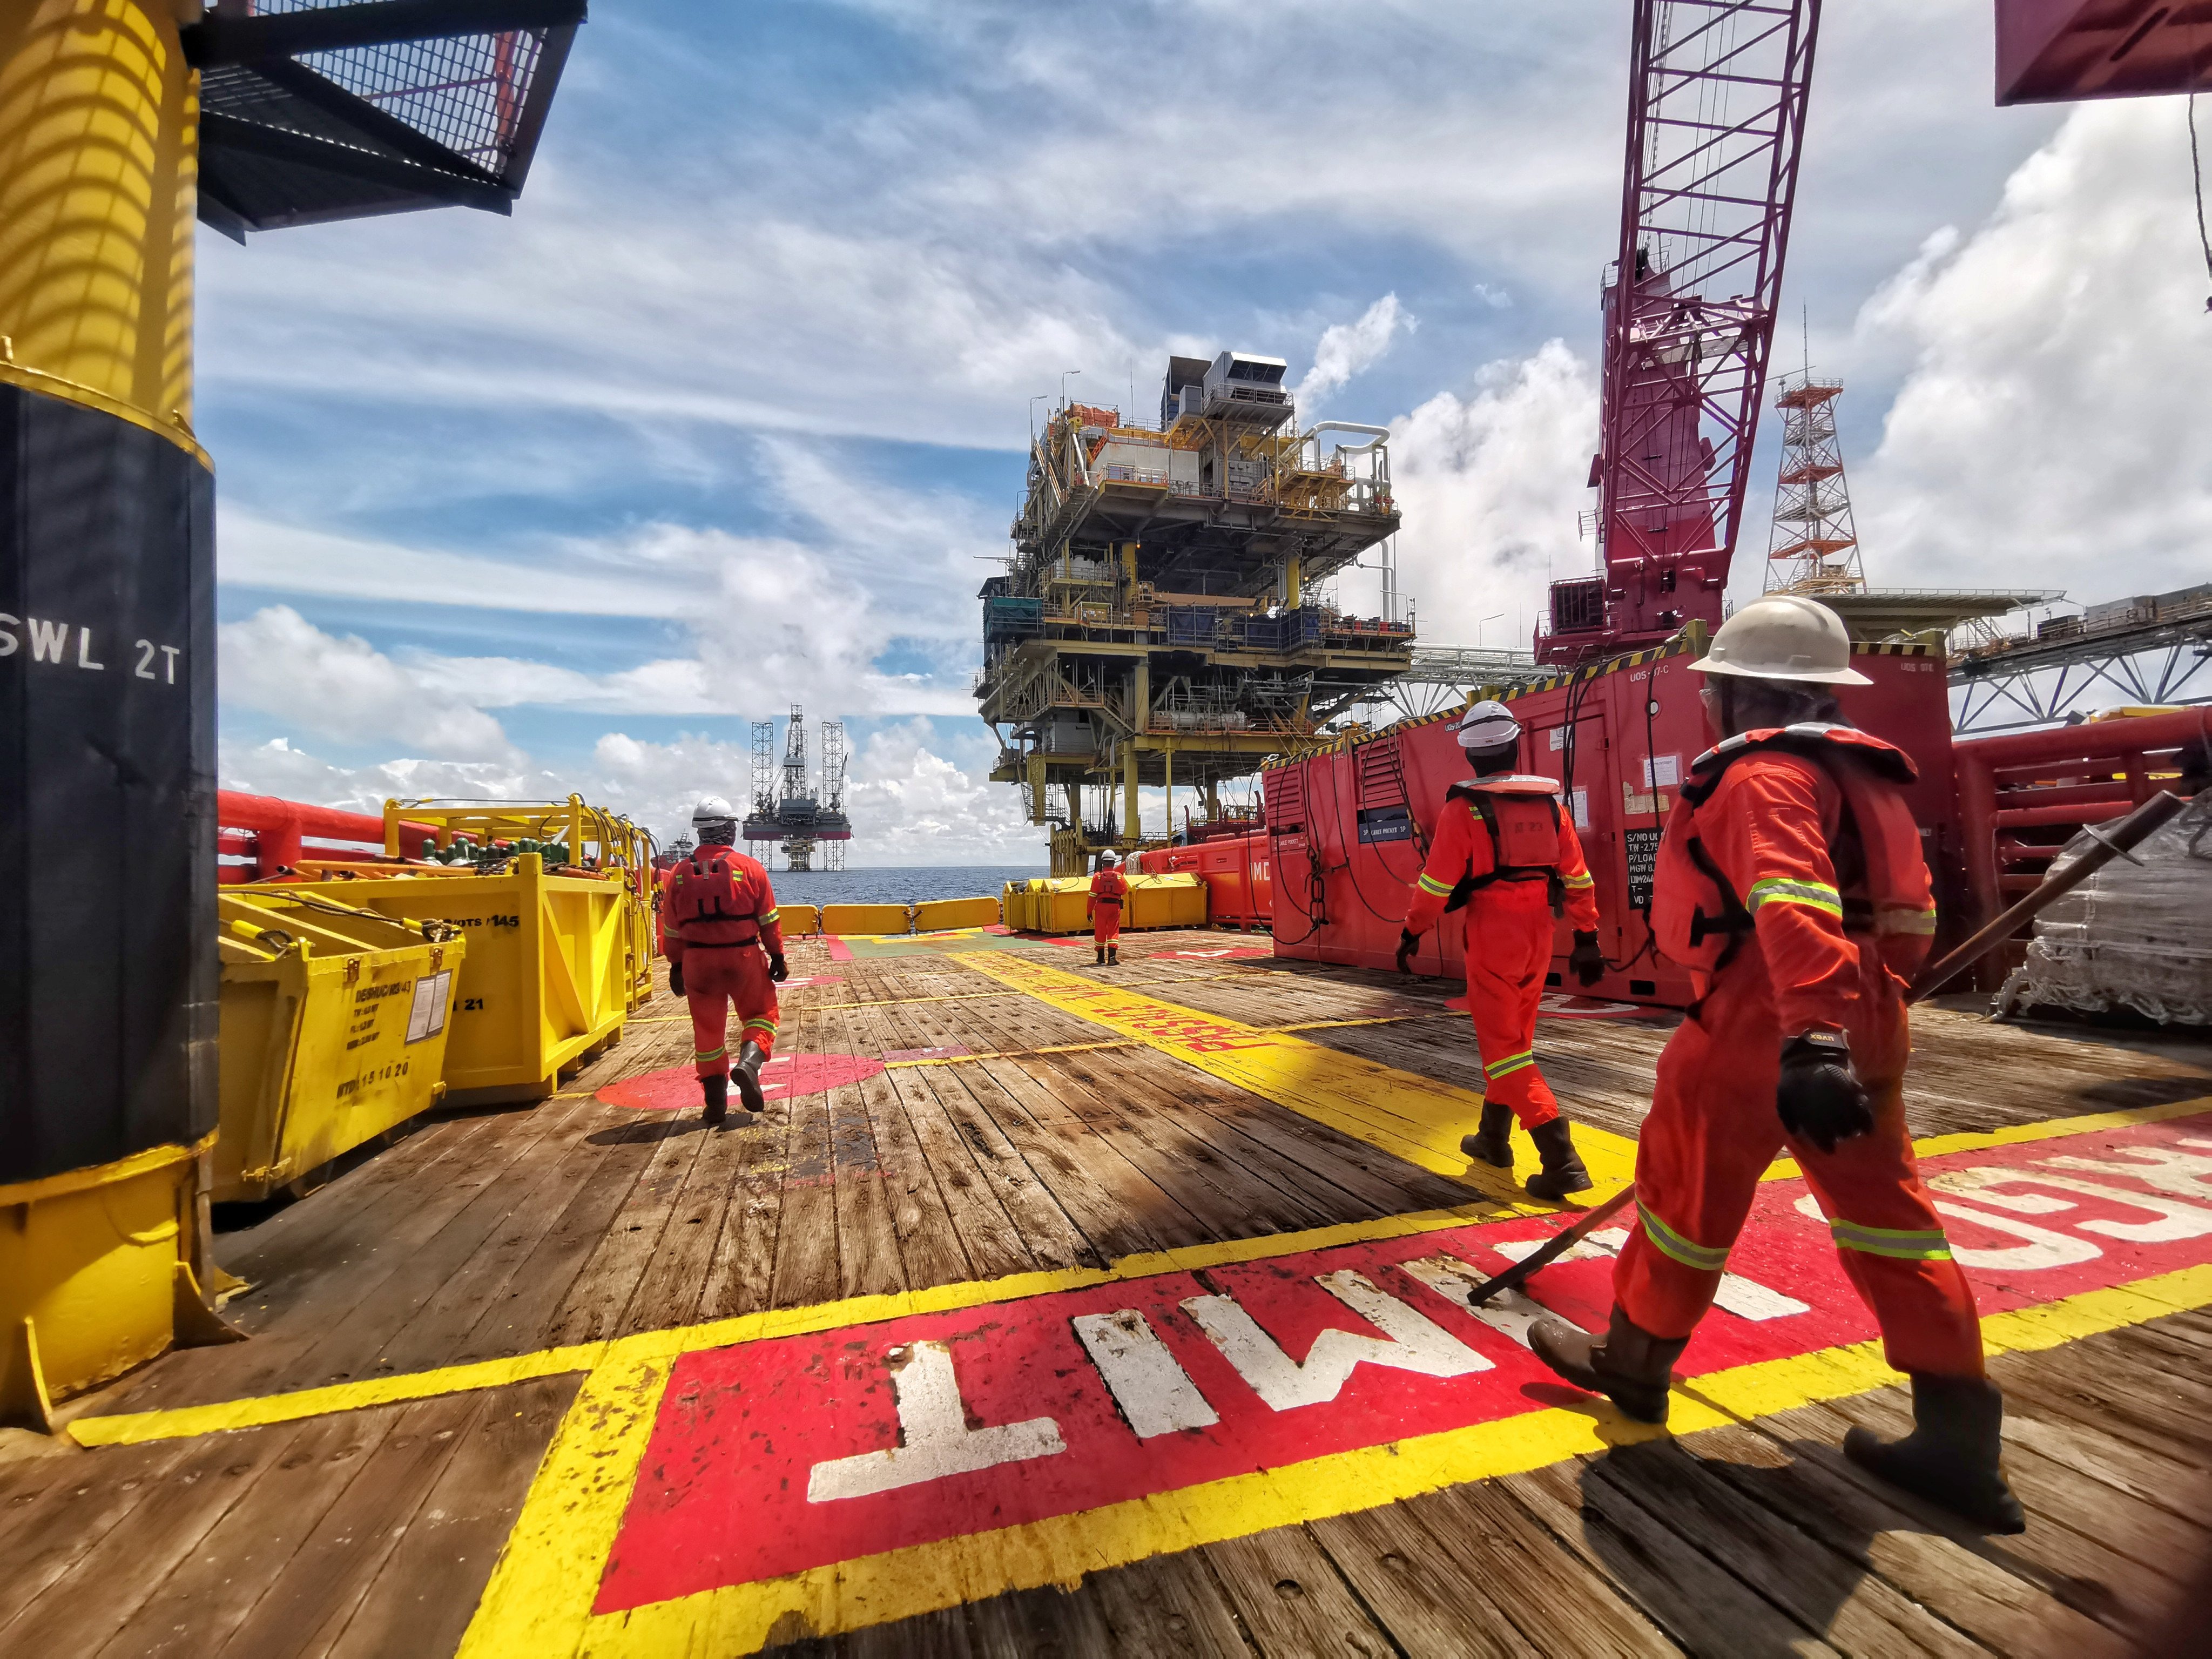 Offshore marine crew stand by on deck during cargo transfer from vessel to oil platform at sea, off Sabah. Malaysia’s maritime assets are notoriously poorly funded and unable to fully patrol waters, analysts say. Photo: Shutterstock